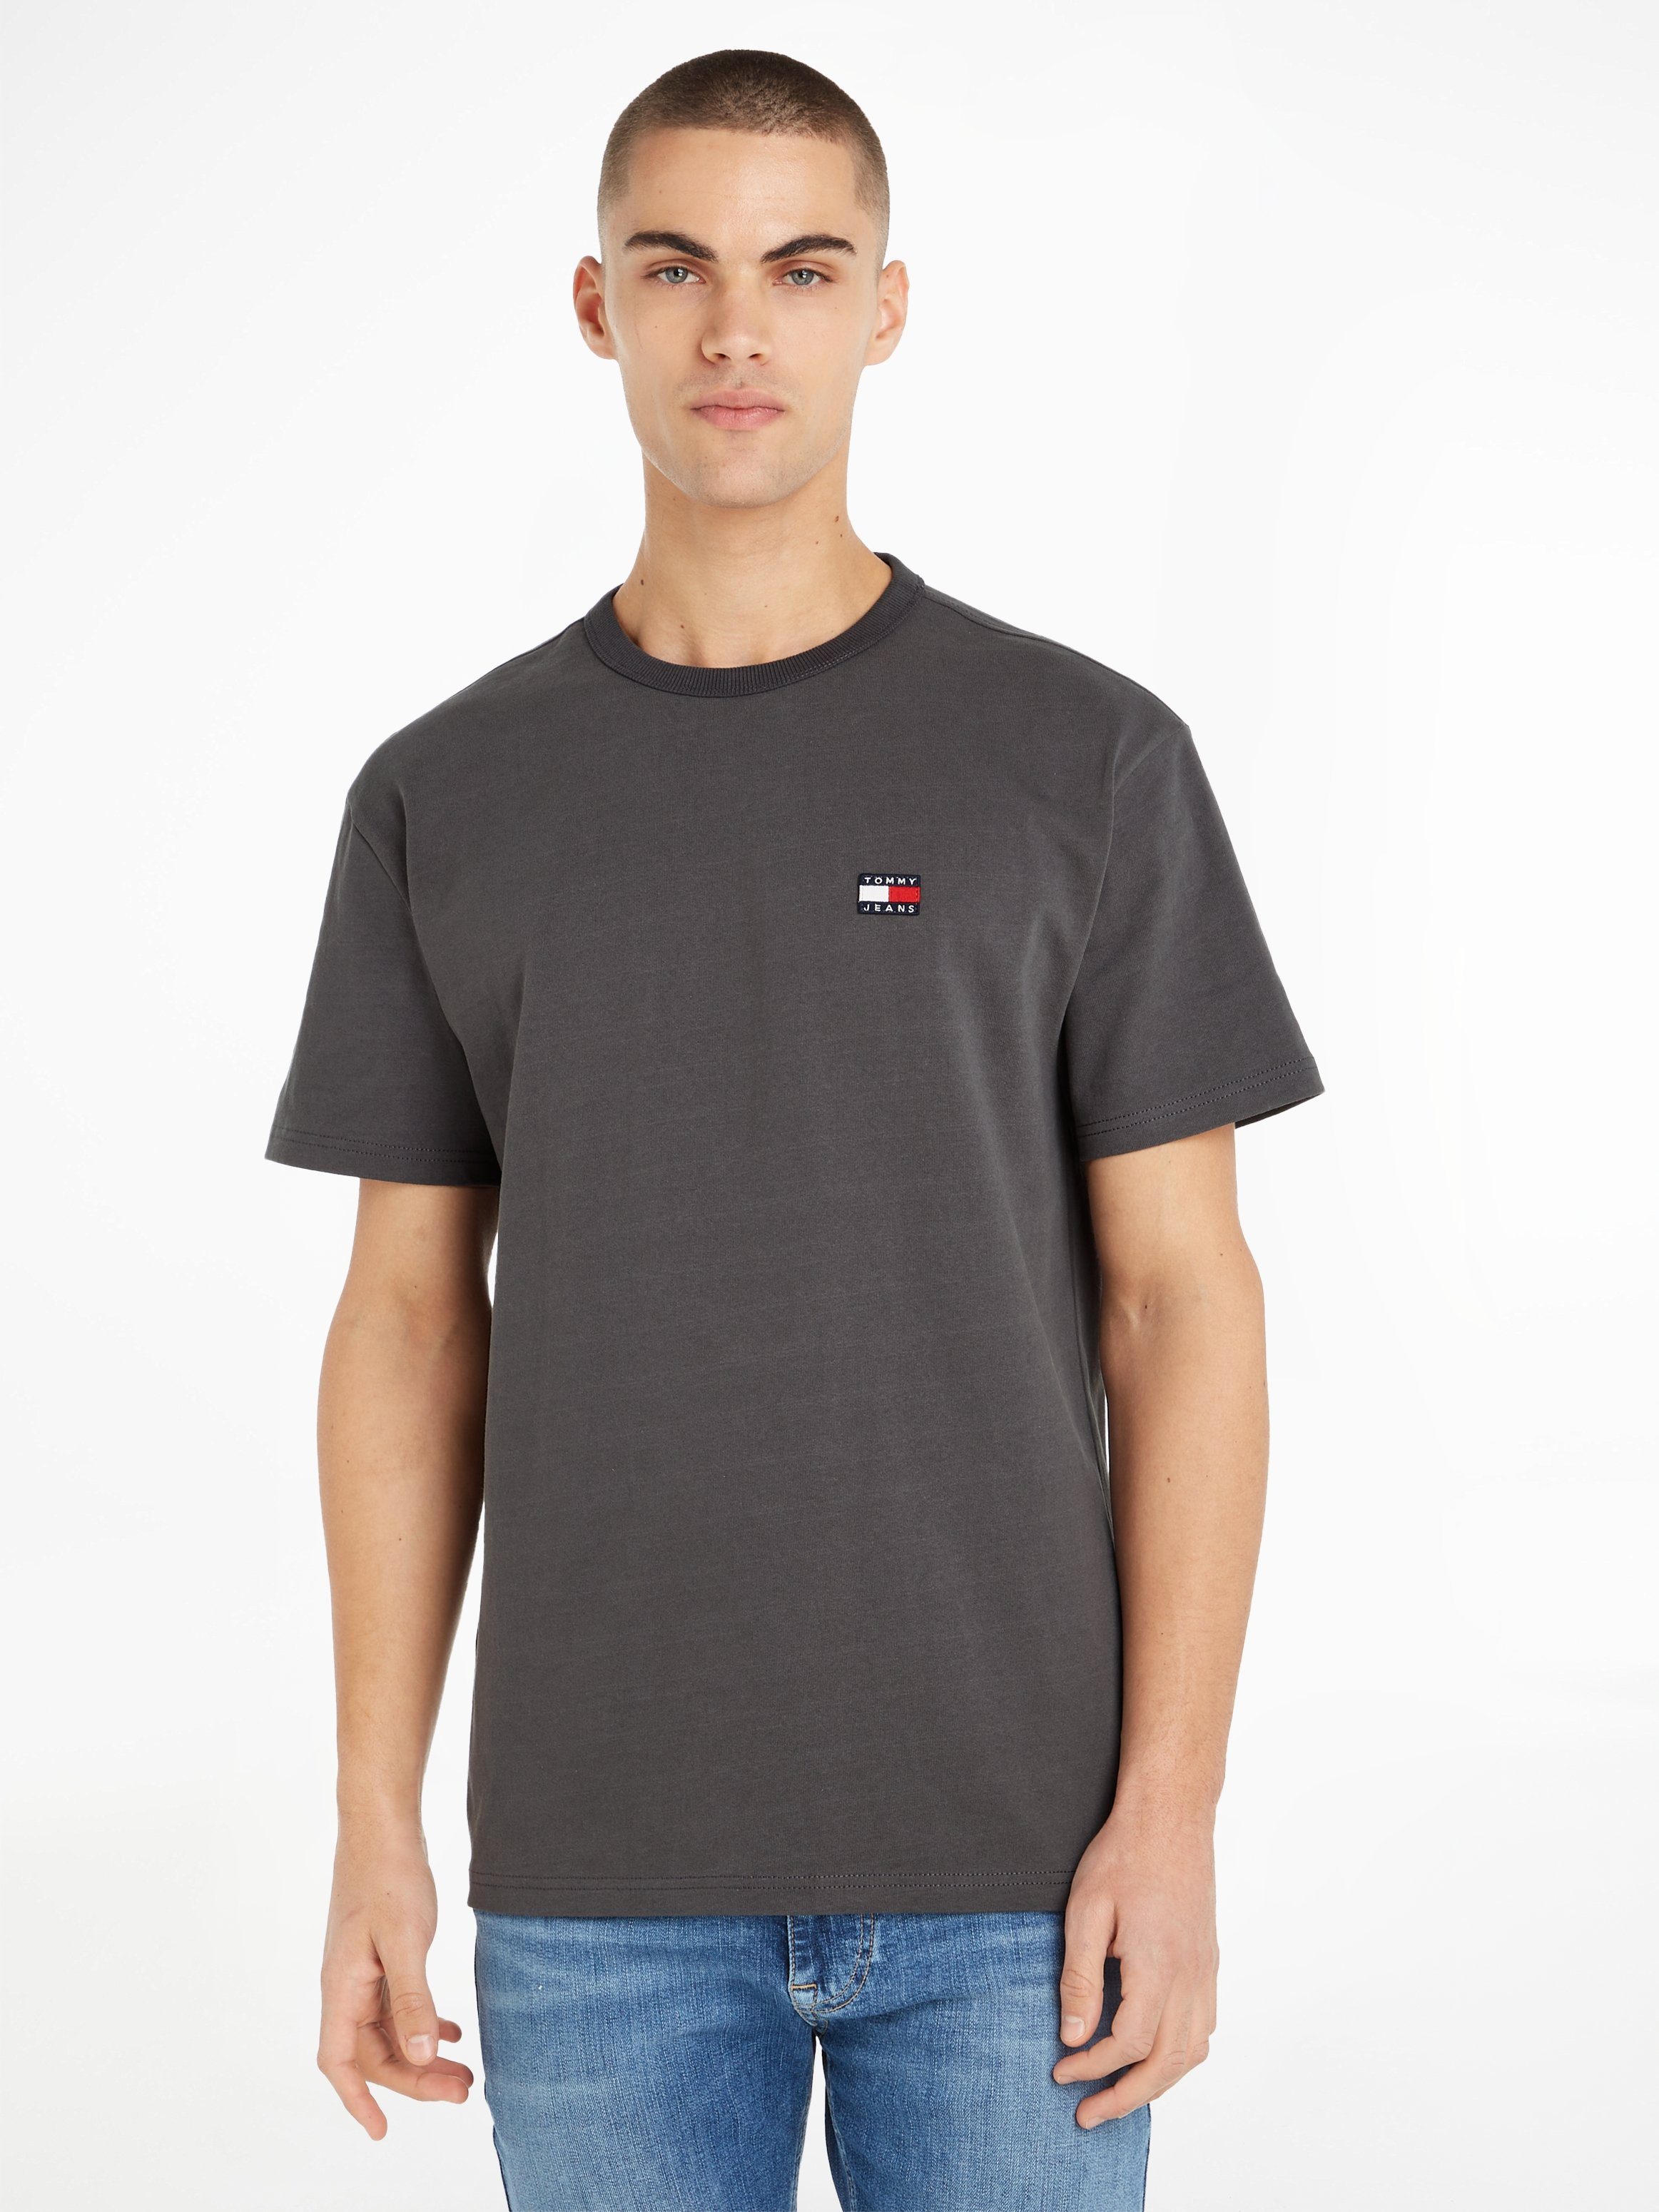 [Sehr beliebtes Standardprodukt] Tommy Jeans TJM CLSC XS TOMMY Charcoal BADGE New T-Shirt TEE